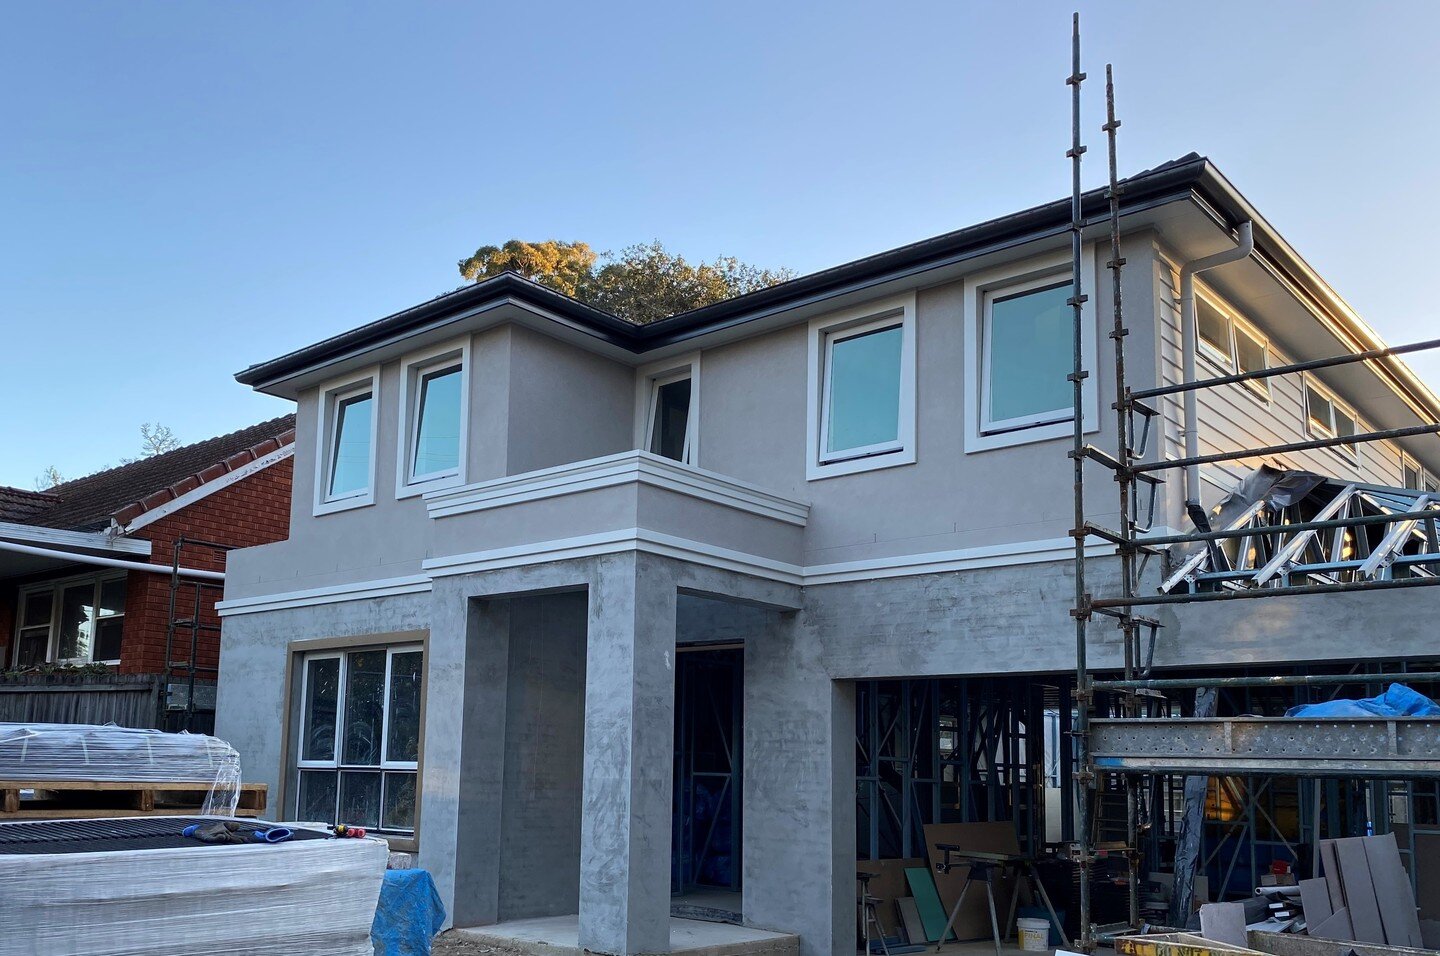 Build up /\ Reveal down \/ 
A quick progress shot on one of our residential projects. We are working closely with our clients and partners despite ongoing industry challenges. Featuring @renderlookmouldings &amp; @upper_constructions handy work